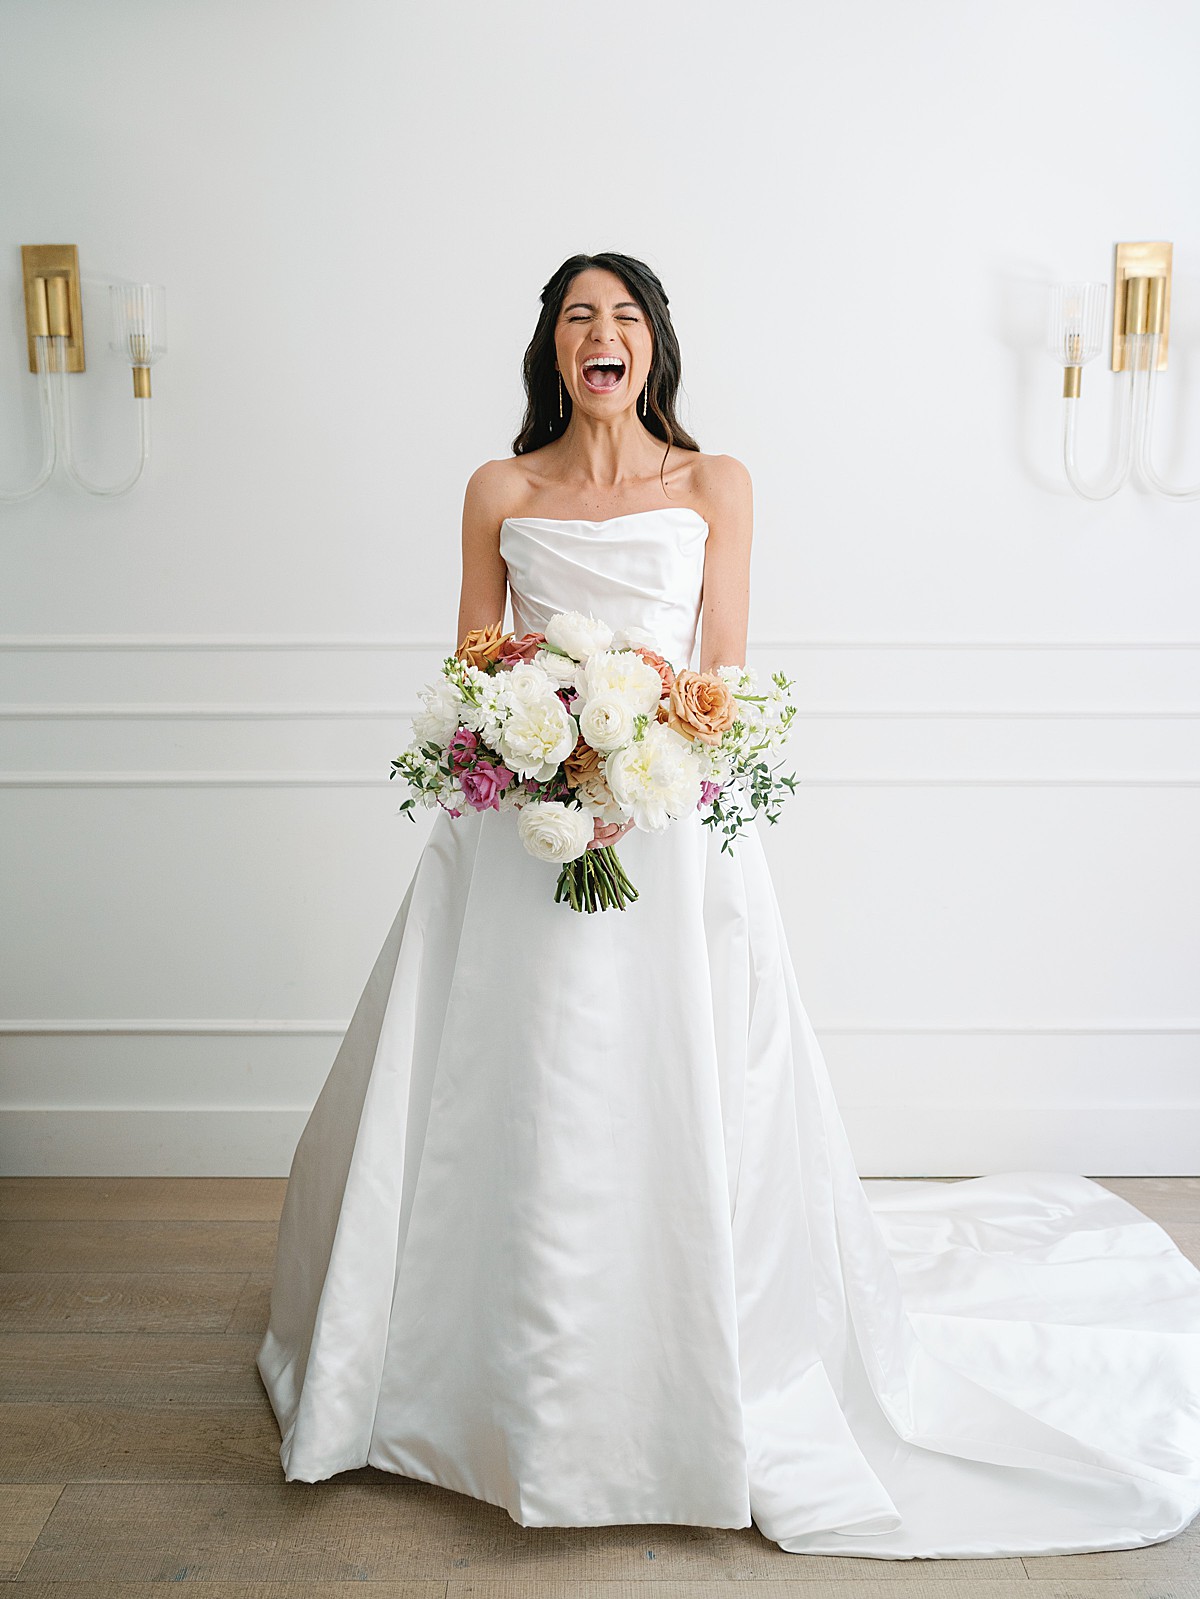 Bride laughing while holding her bouquet in the bridal room at Bishop Station in Atlanta